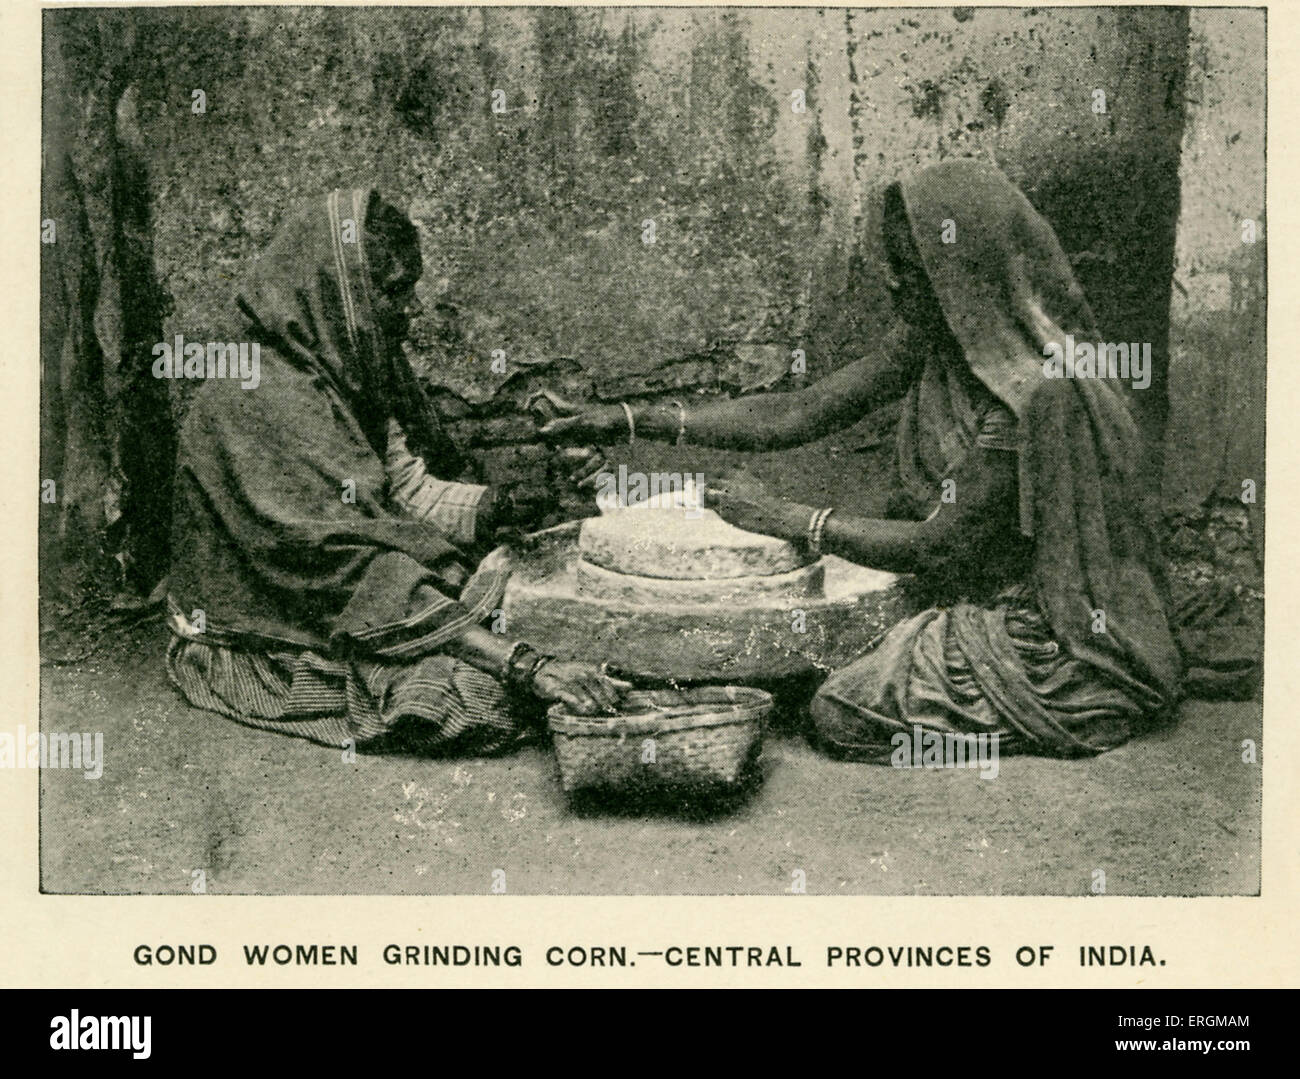 Gondi women grinding corn. Photograph from early 20th century. The Gondi people are native to India's central states, with dense populations in Madhya Pradesh and Maharashtra. Adjacent quotation reads: 'In my judgment, Christian missionaries have done more real and lasting good to the people of India than all other agencies combined. They have been the salt of the country, and the true saviours of the Empire', attributed to Sir A. Rivers Thompson, Governor of Bengal. Stock Photo